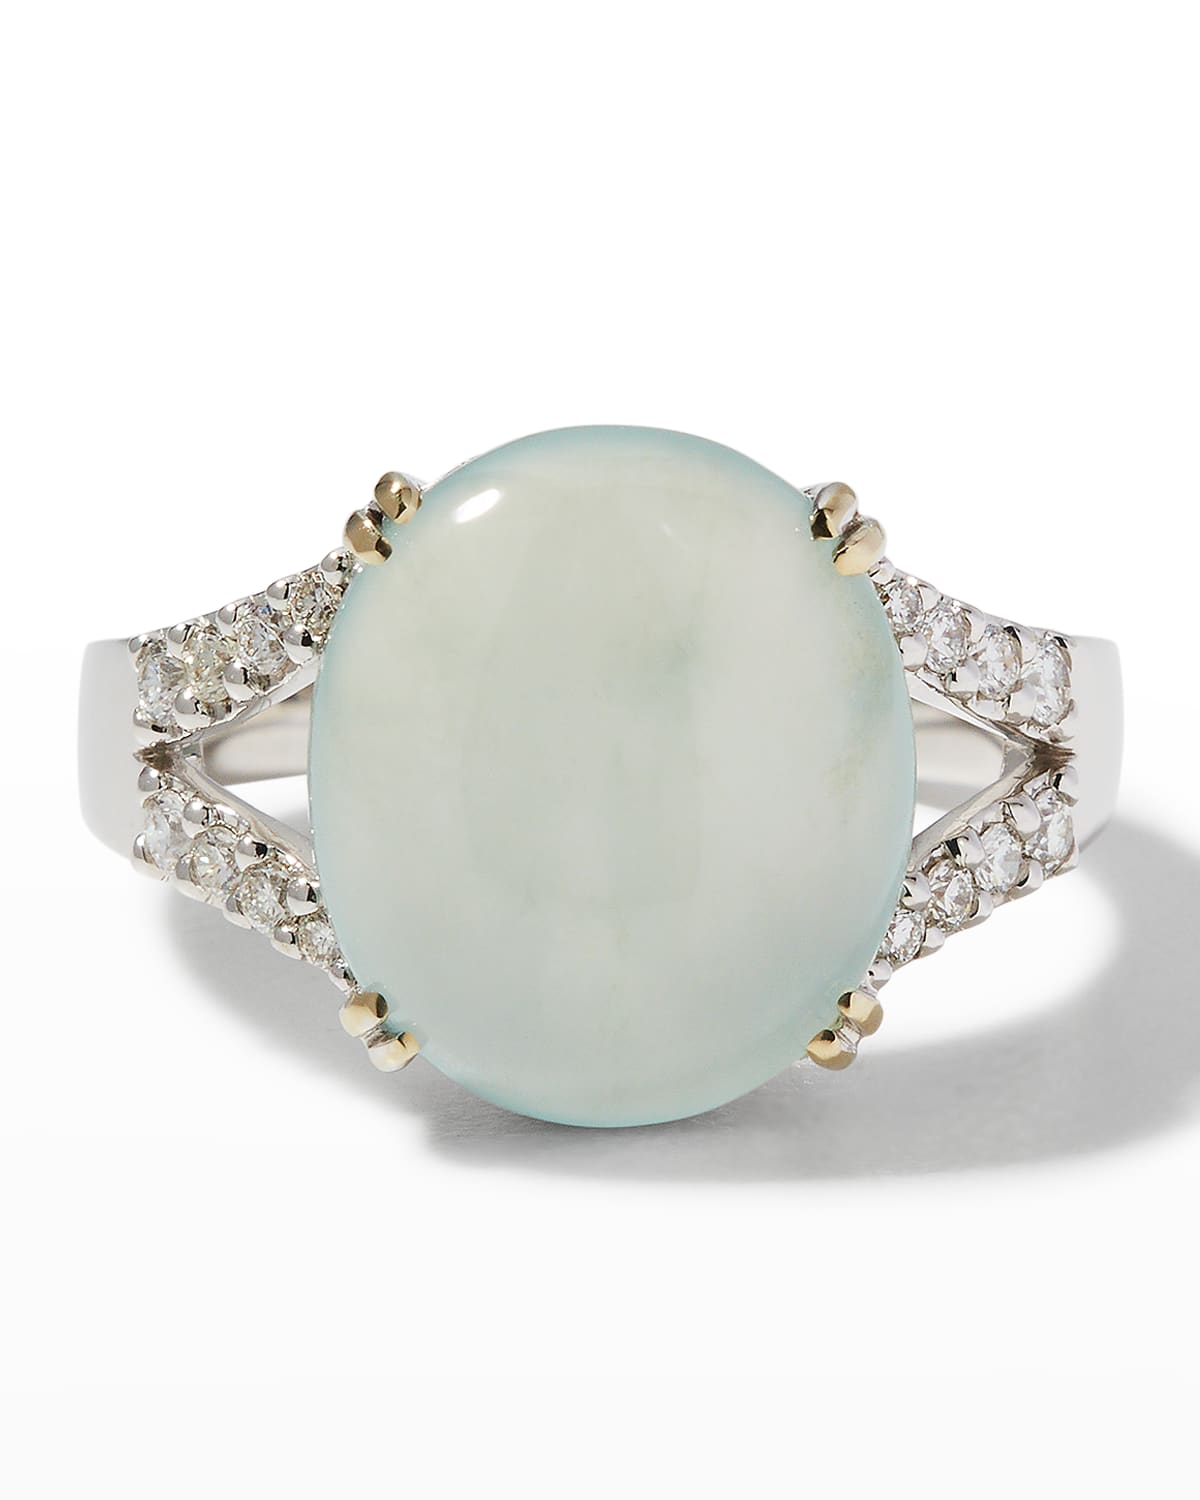 David C.A. Lin Rare Translucent Jade Oval Ring in White Gold with Diamonds, Size 6.5